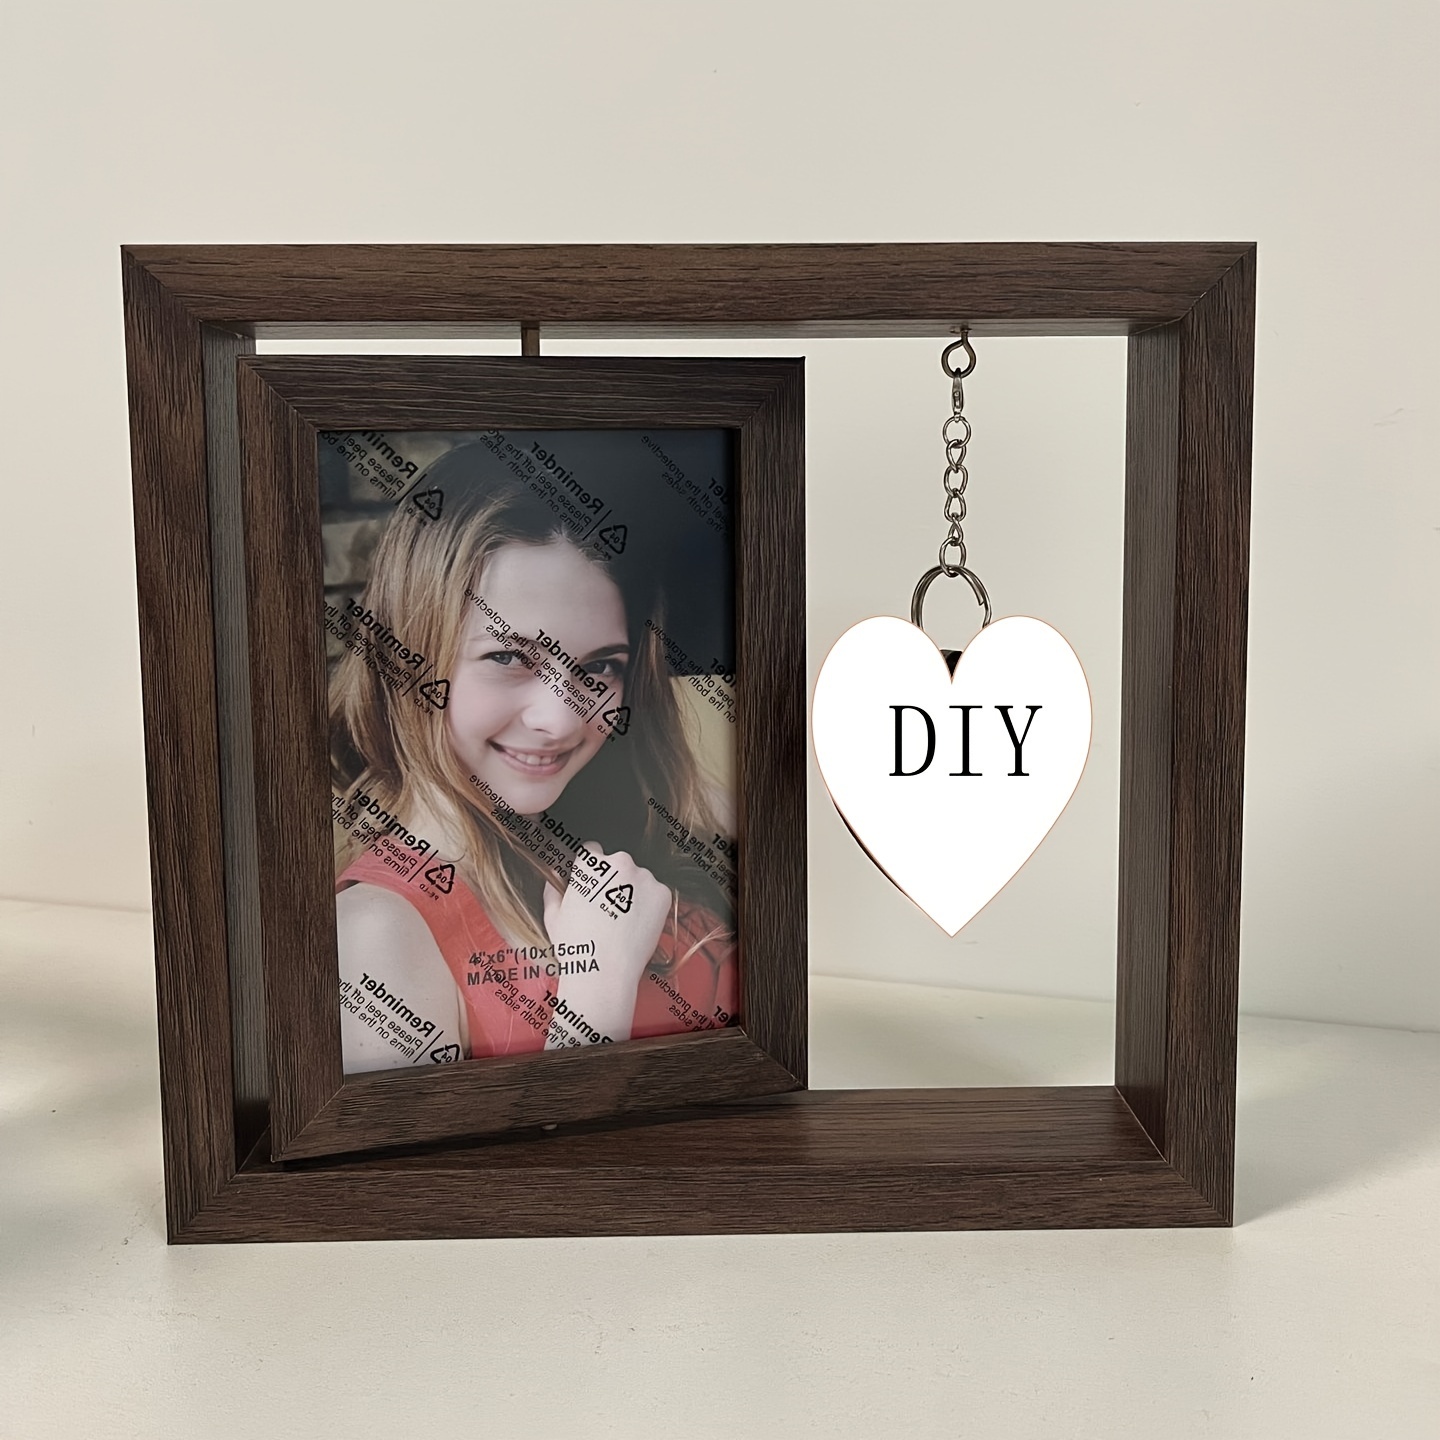  WhatSign Valentines Day Picture Frame You Will Forever Be My  Alwarys Wood Valentines Photo Frame Valentine Love Picture Frame Valentines  Day Gifts for Her Him Girlfriend Boyfriend Wife Husband Couples